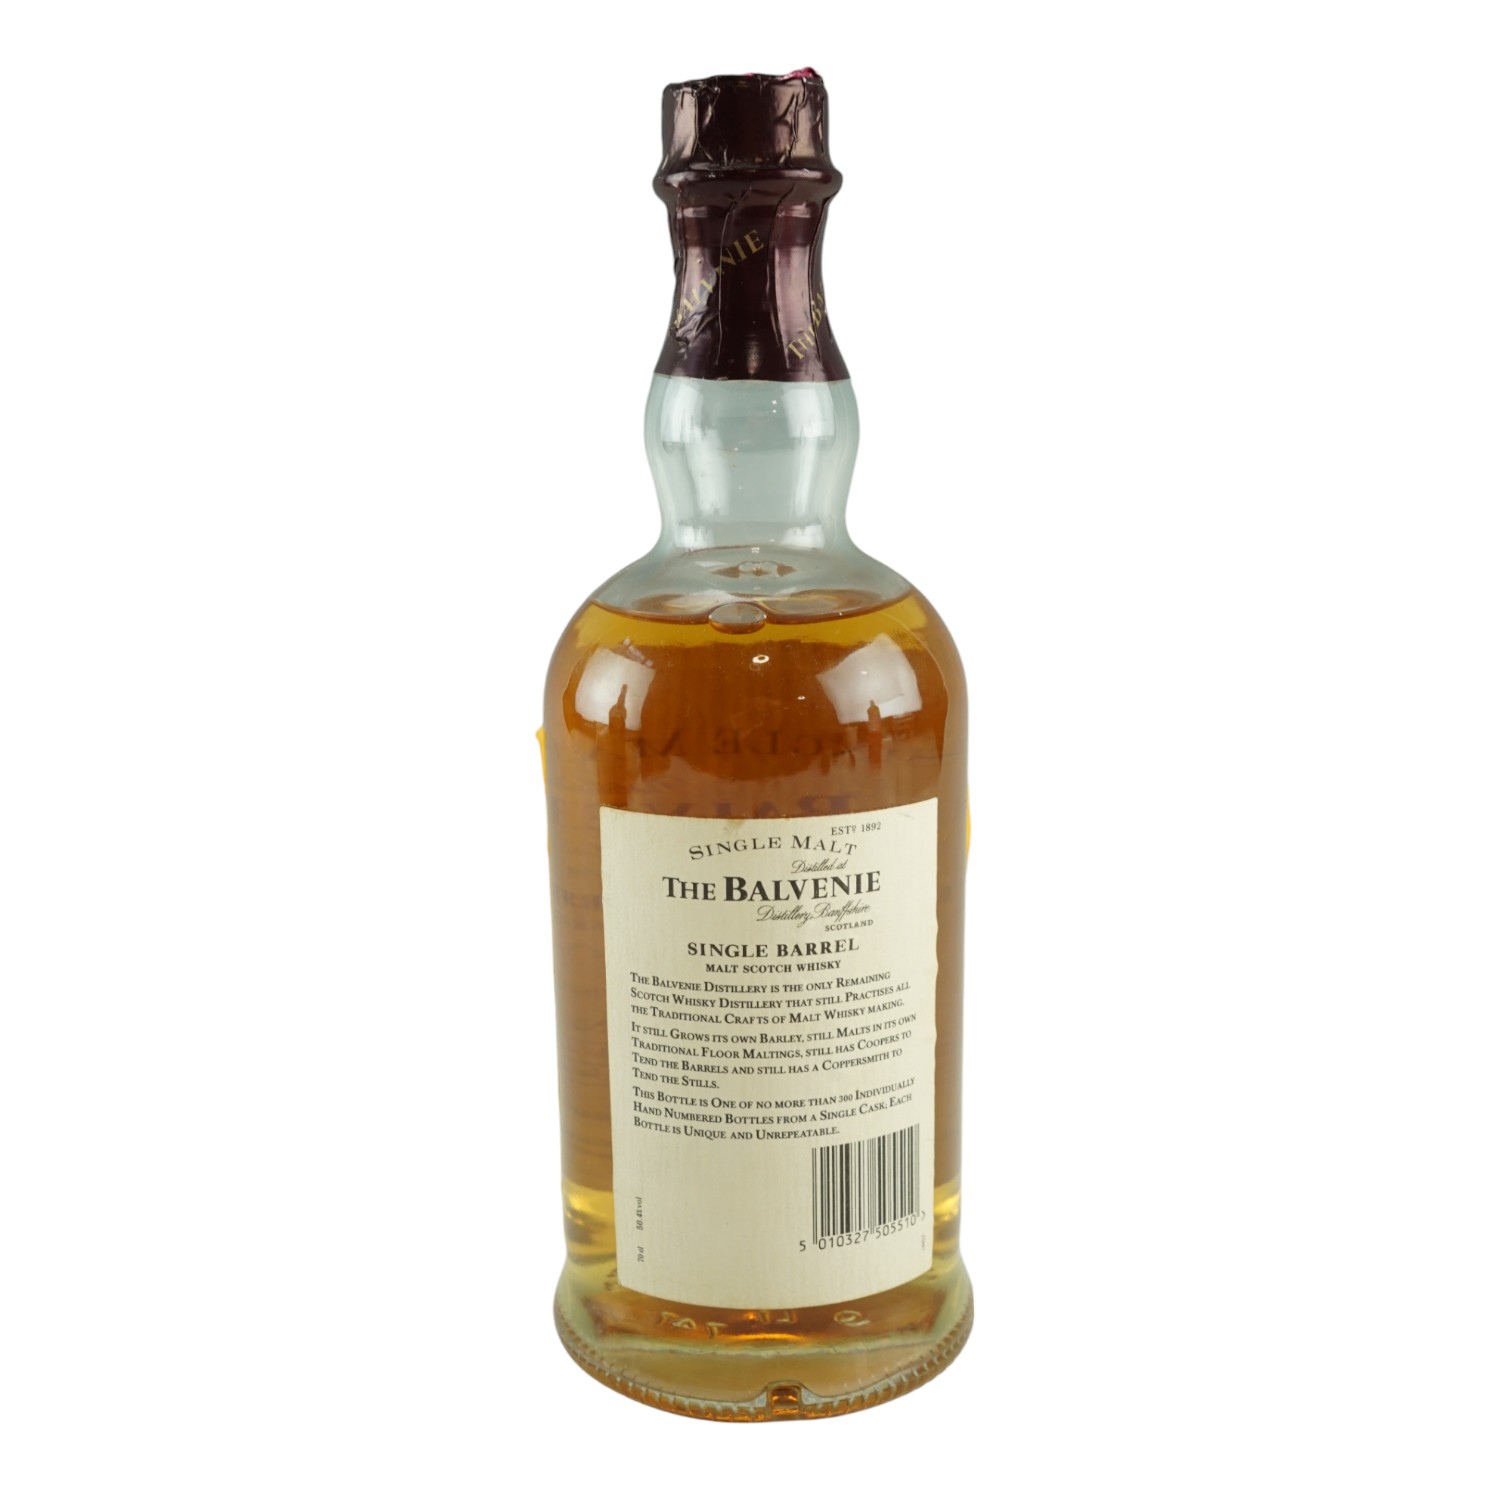 A bottle of The Balvenie 15 year old single malt Scotch whisky, casked 1977 and bottled 1994, 70 cl - Image 2 of 2